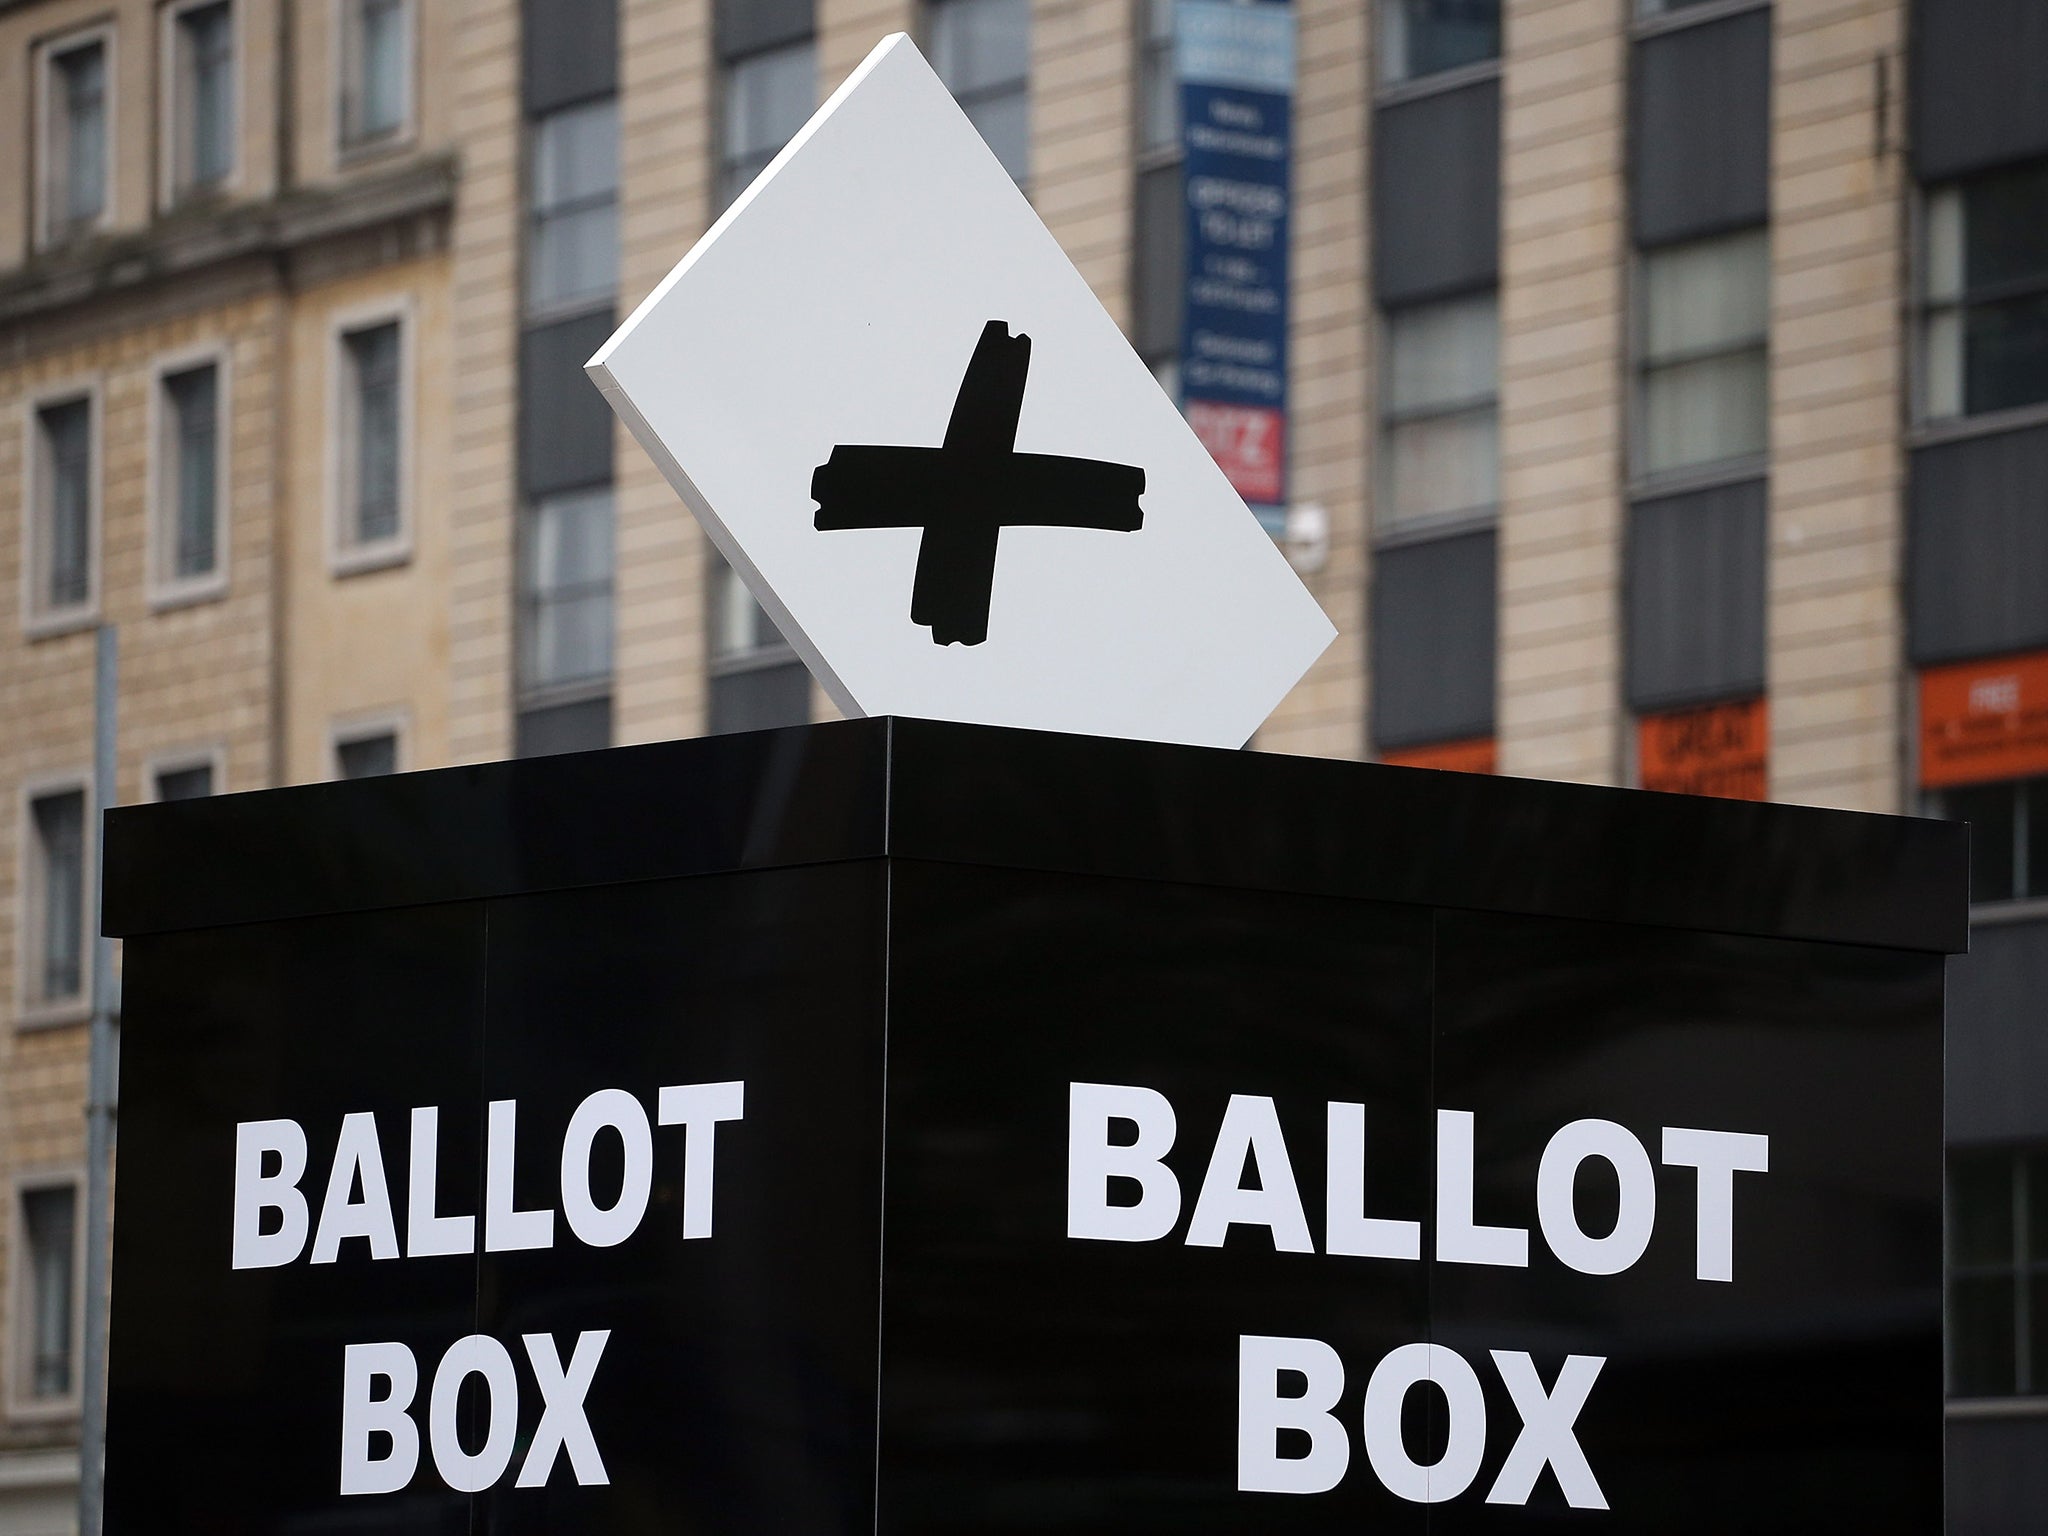 Tactical voting is a necessary evil of the current first-past-the-post system, where voters vote against what they do not want rather than in favour of what they do